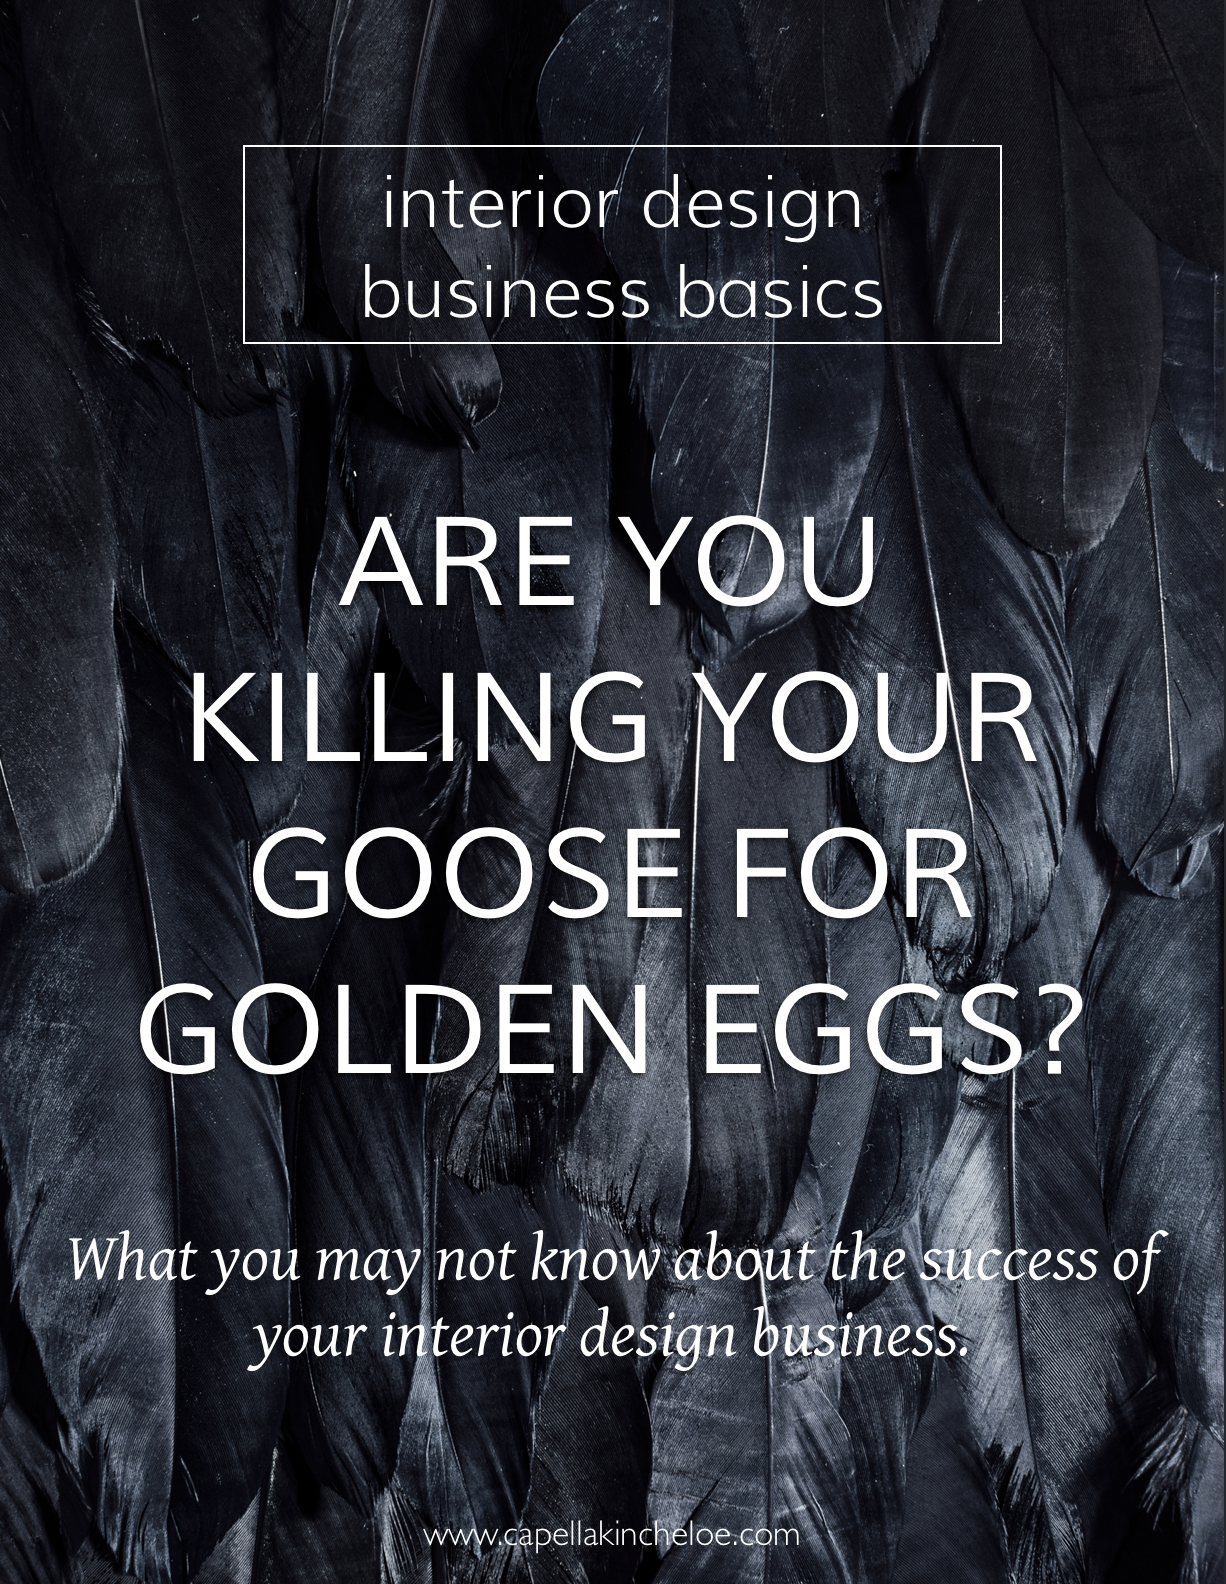 What a Goose and Golden Egg Has to Do With Interior Design Business